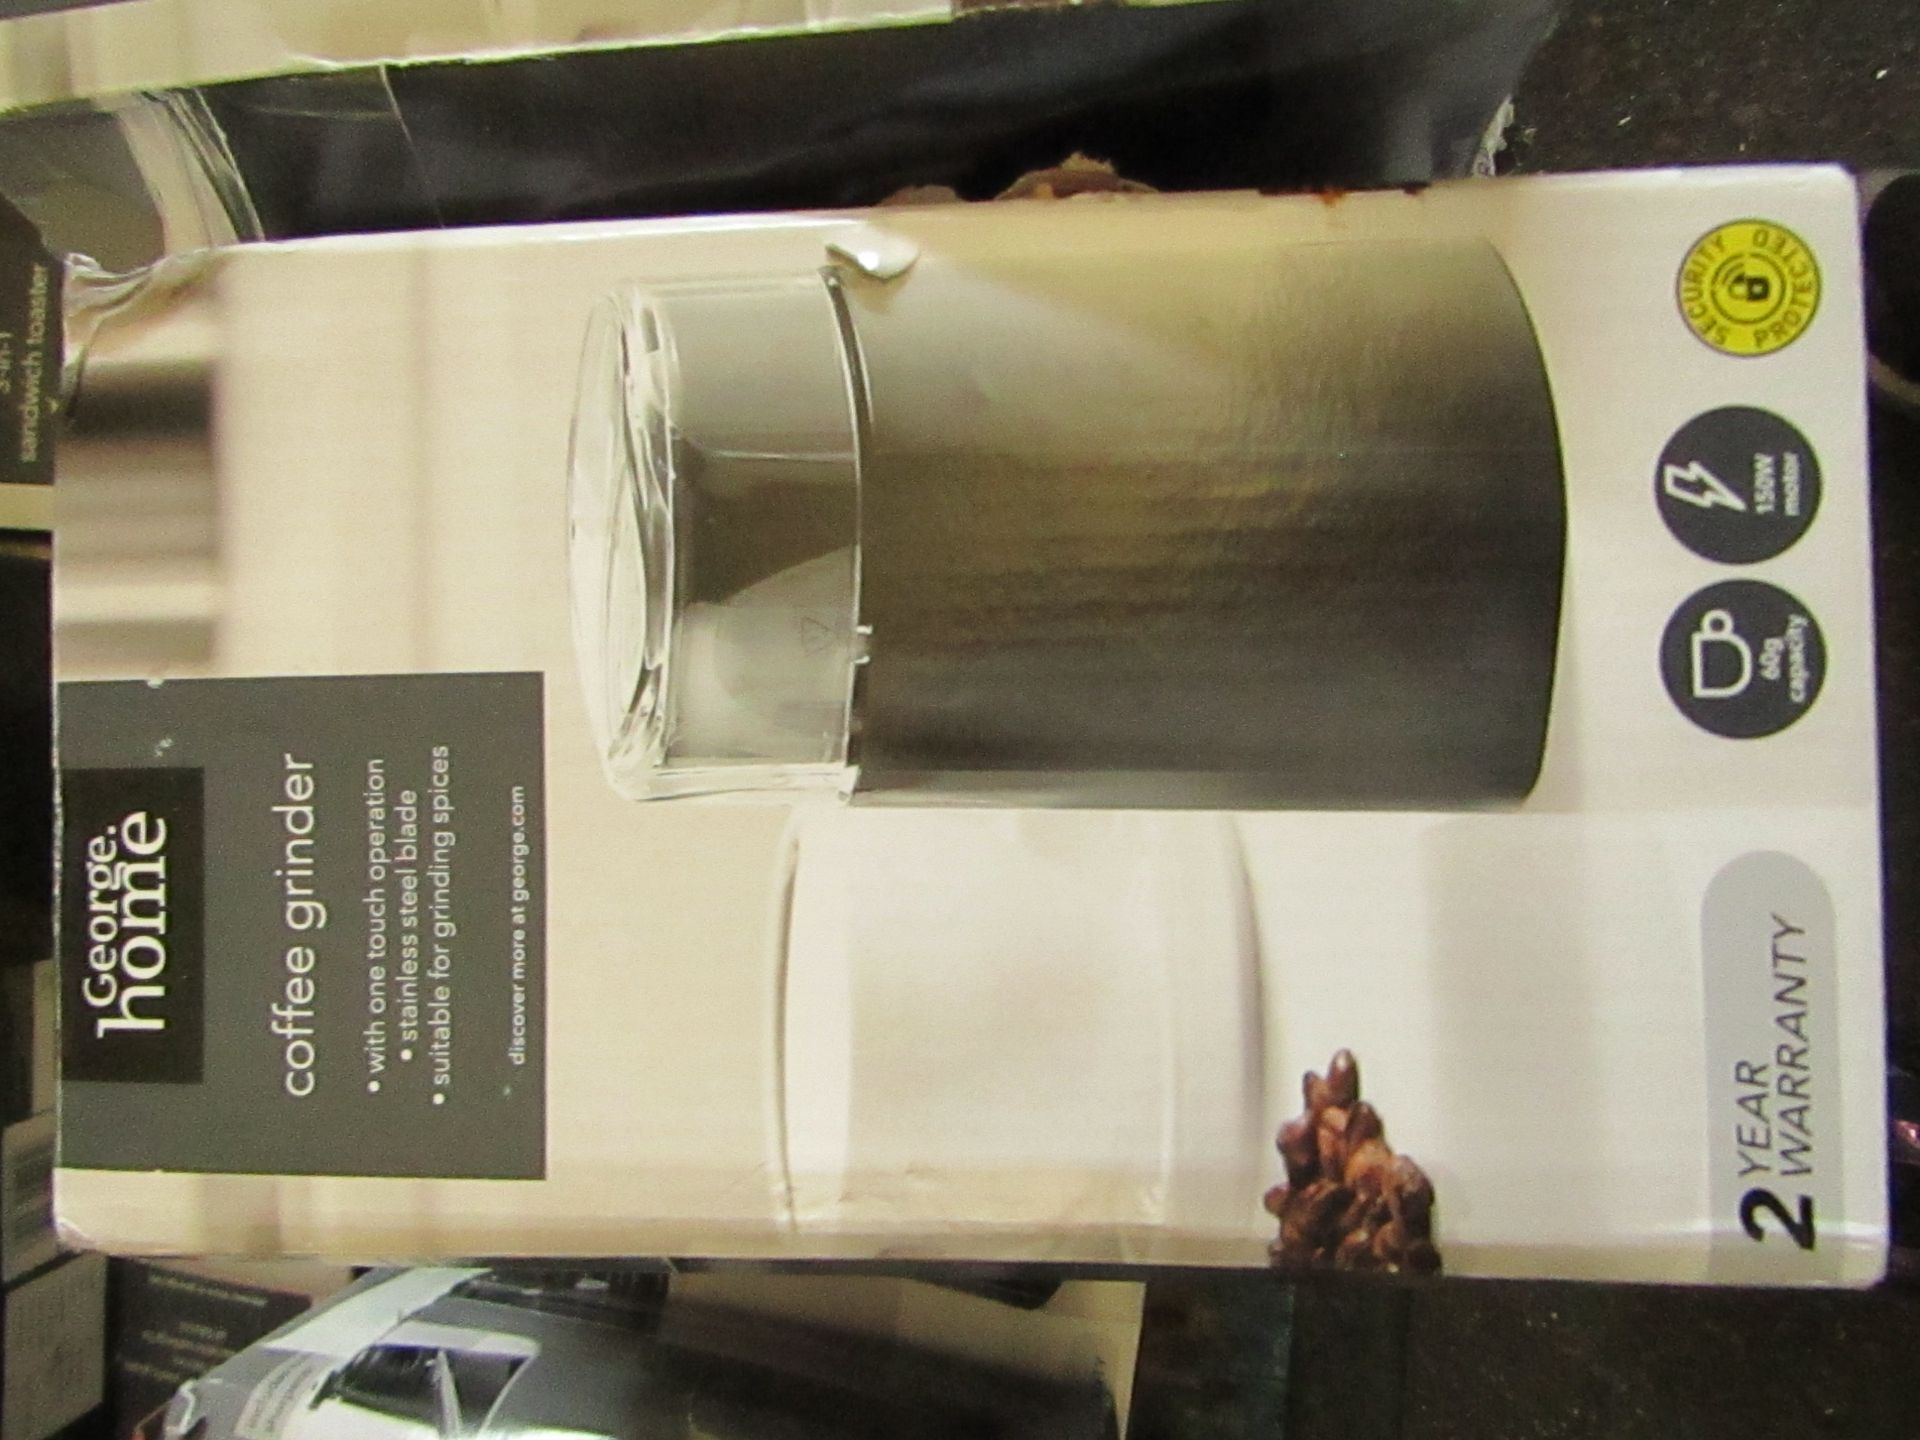 | 3X | 150W 60G STAINLESS STEEL COFFEE GRINDER | UNCHECKED & BOXED | NO ONLINE RESALE | RRP £10 |